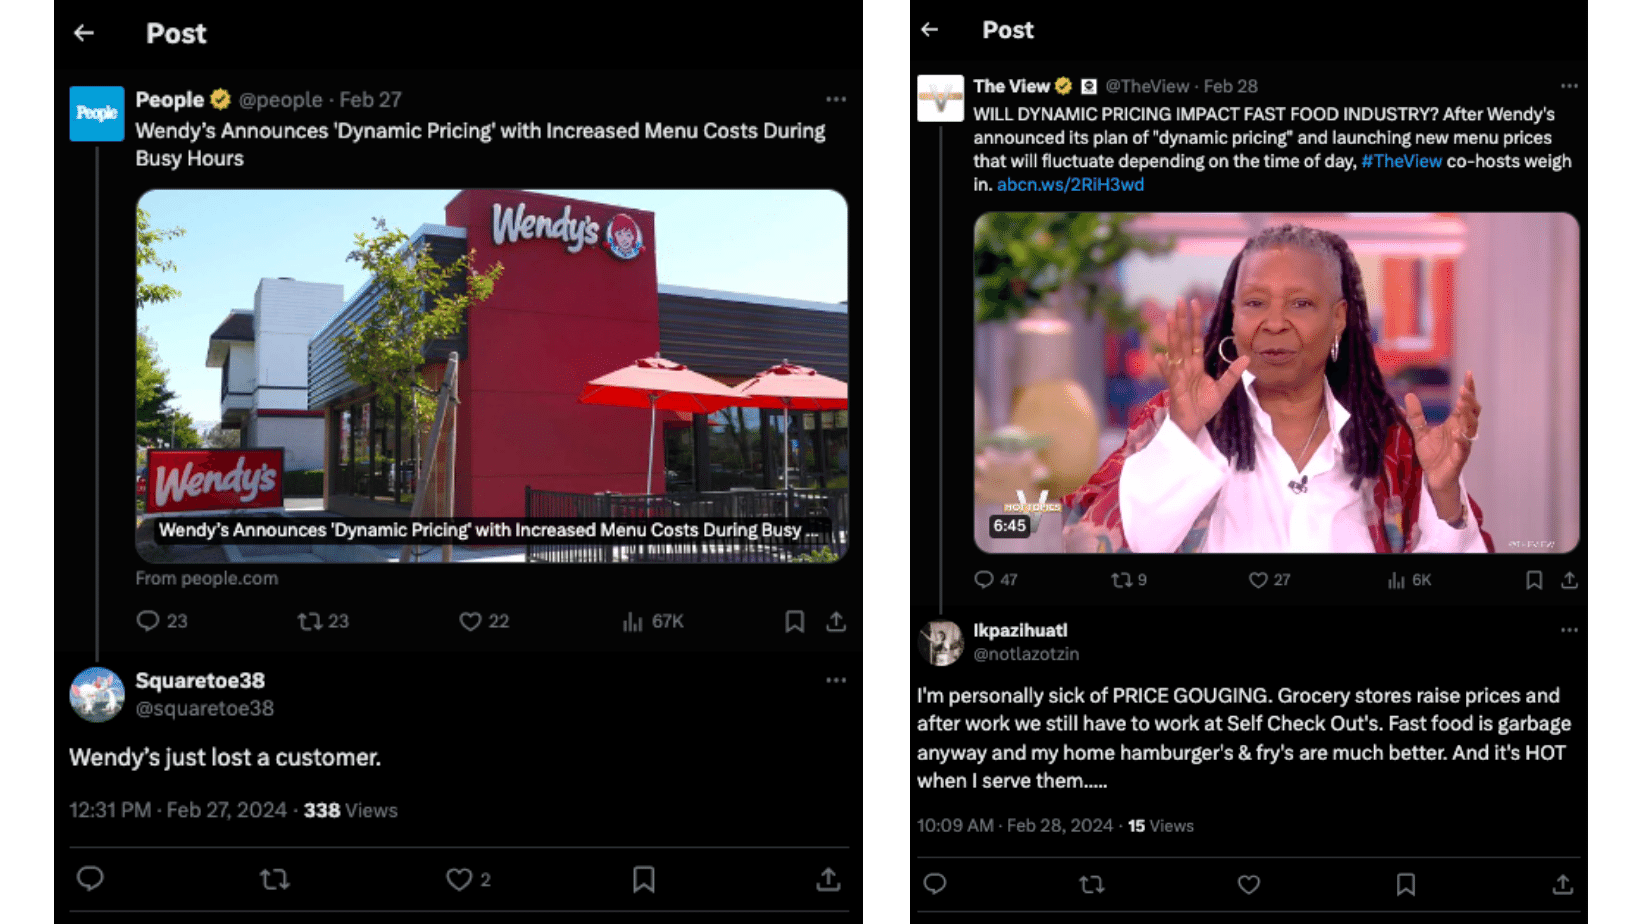 Tweets about Wendy's dynamic pricing announcement 